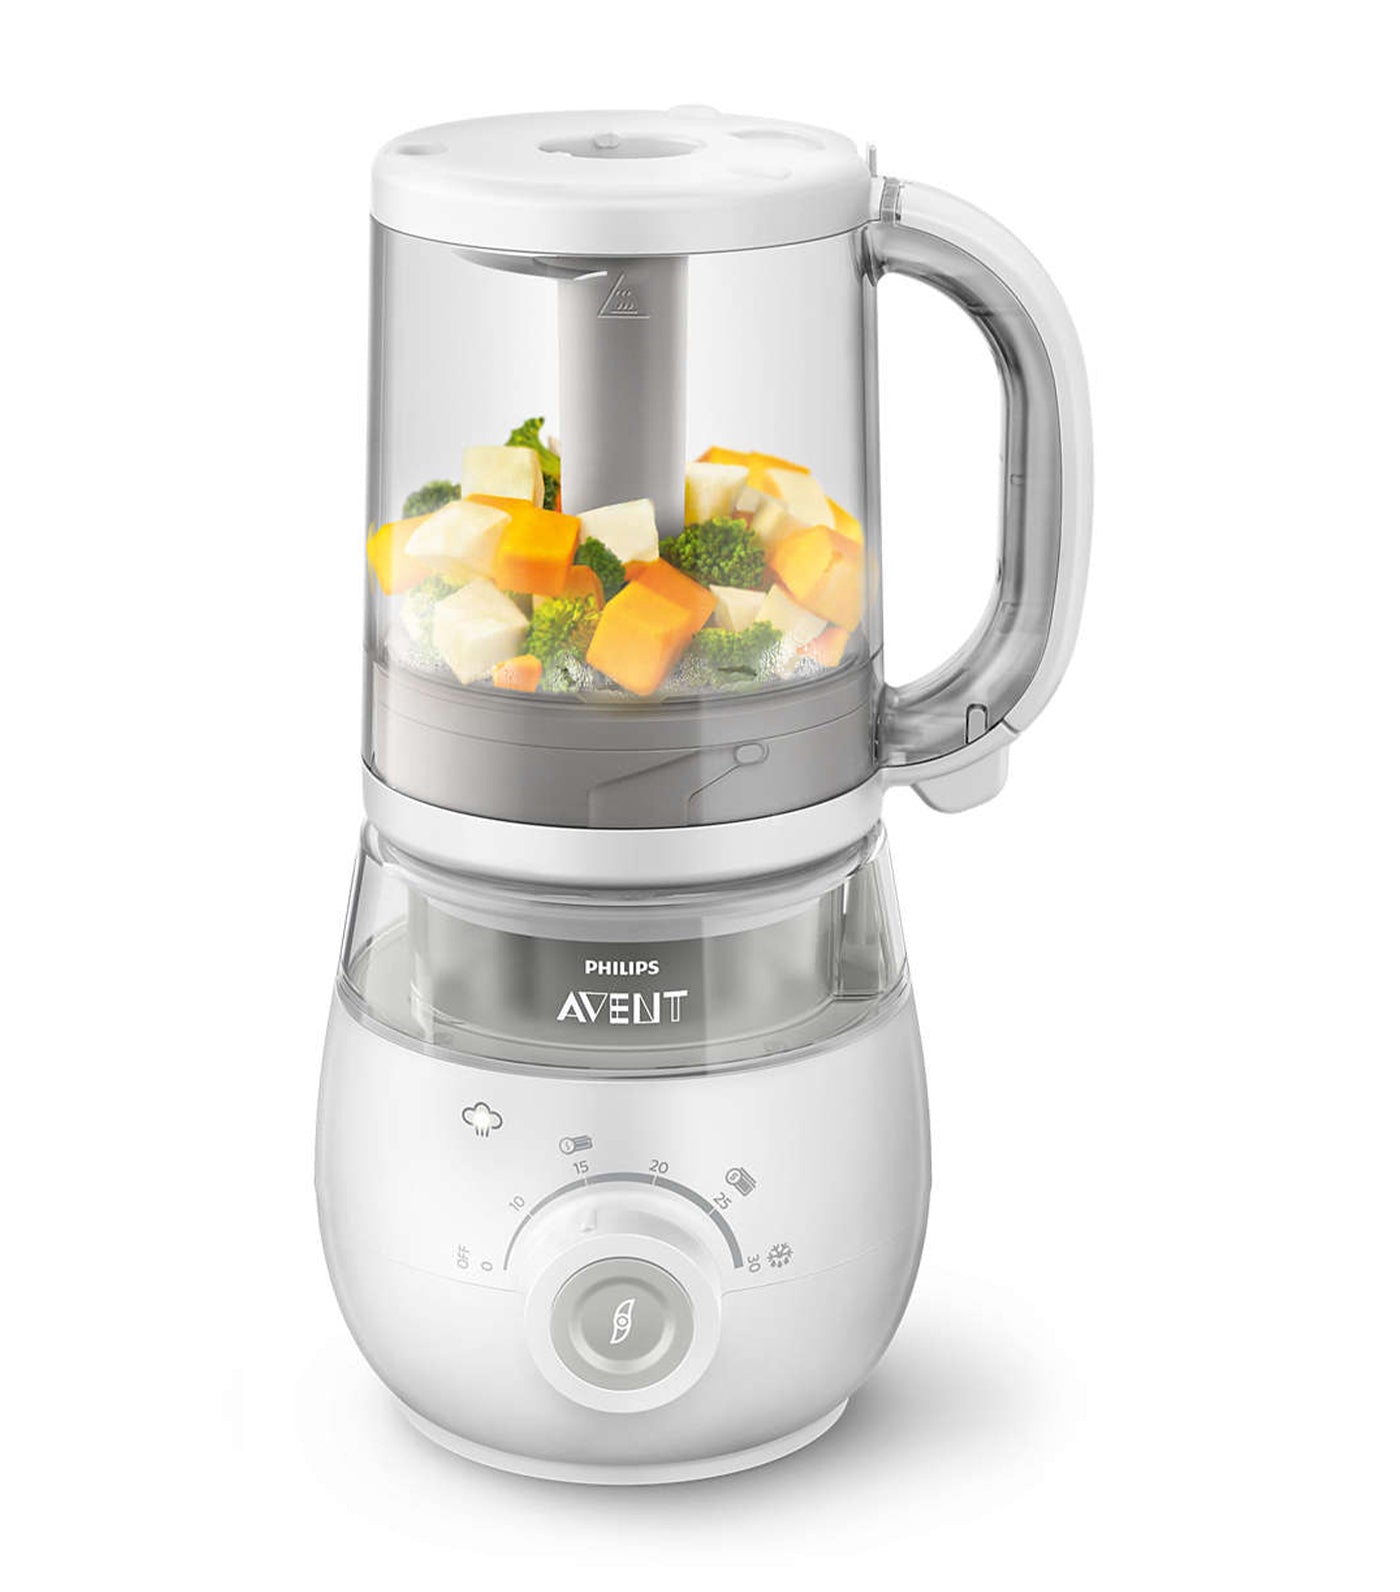 philips avent 4-in-1 healthy baby food maker